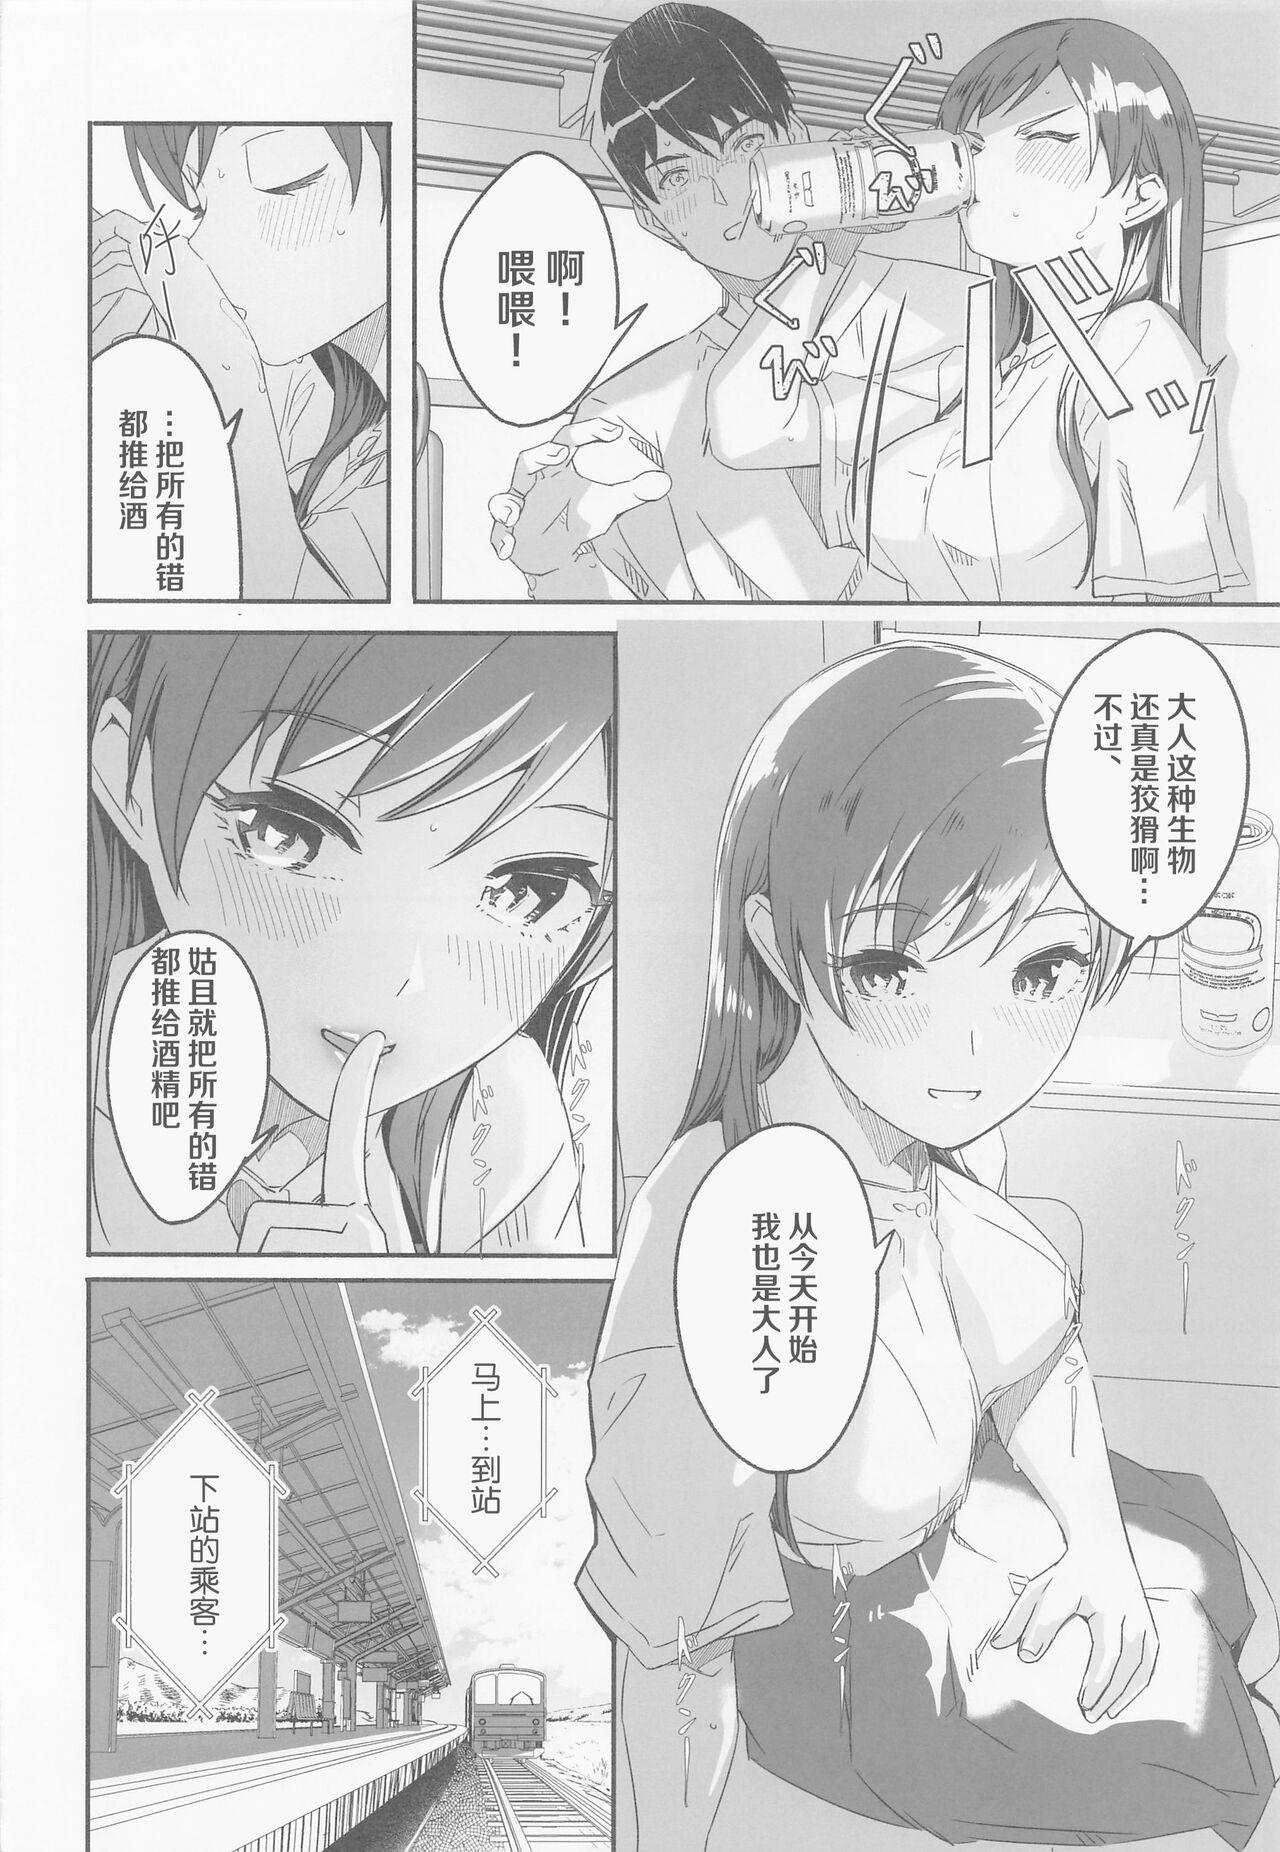 Hot Pussy Otona no Sei ni Shite - It's all the adults' fault. - The idolmaster Fishnets - Page 5